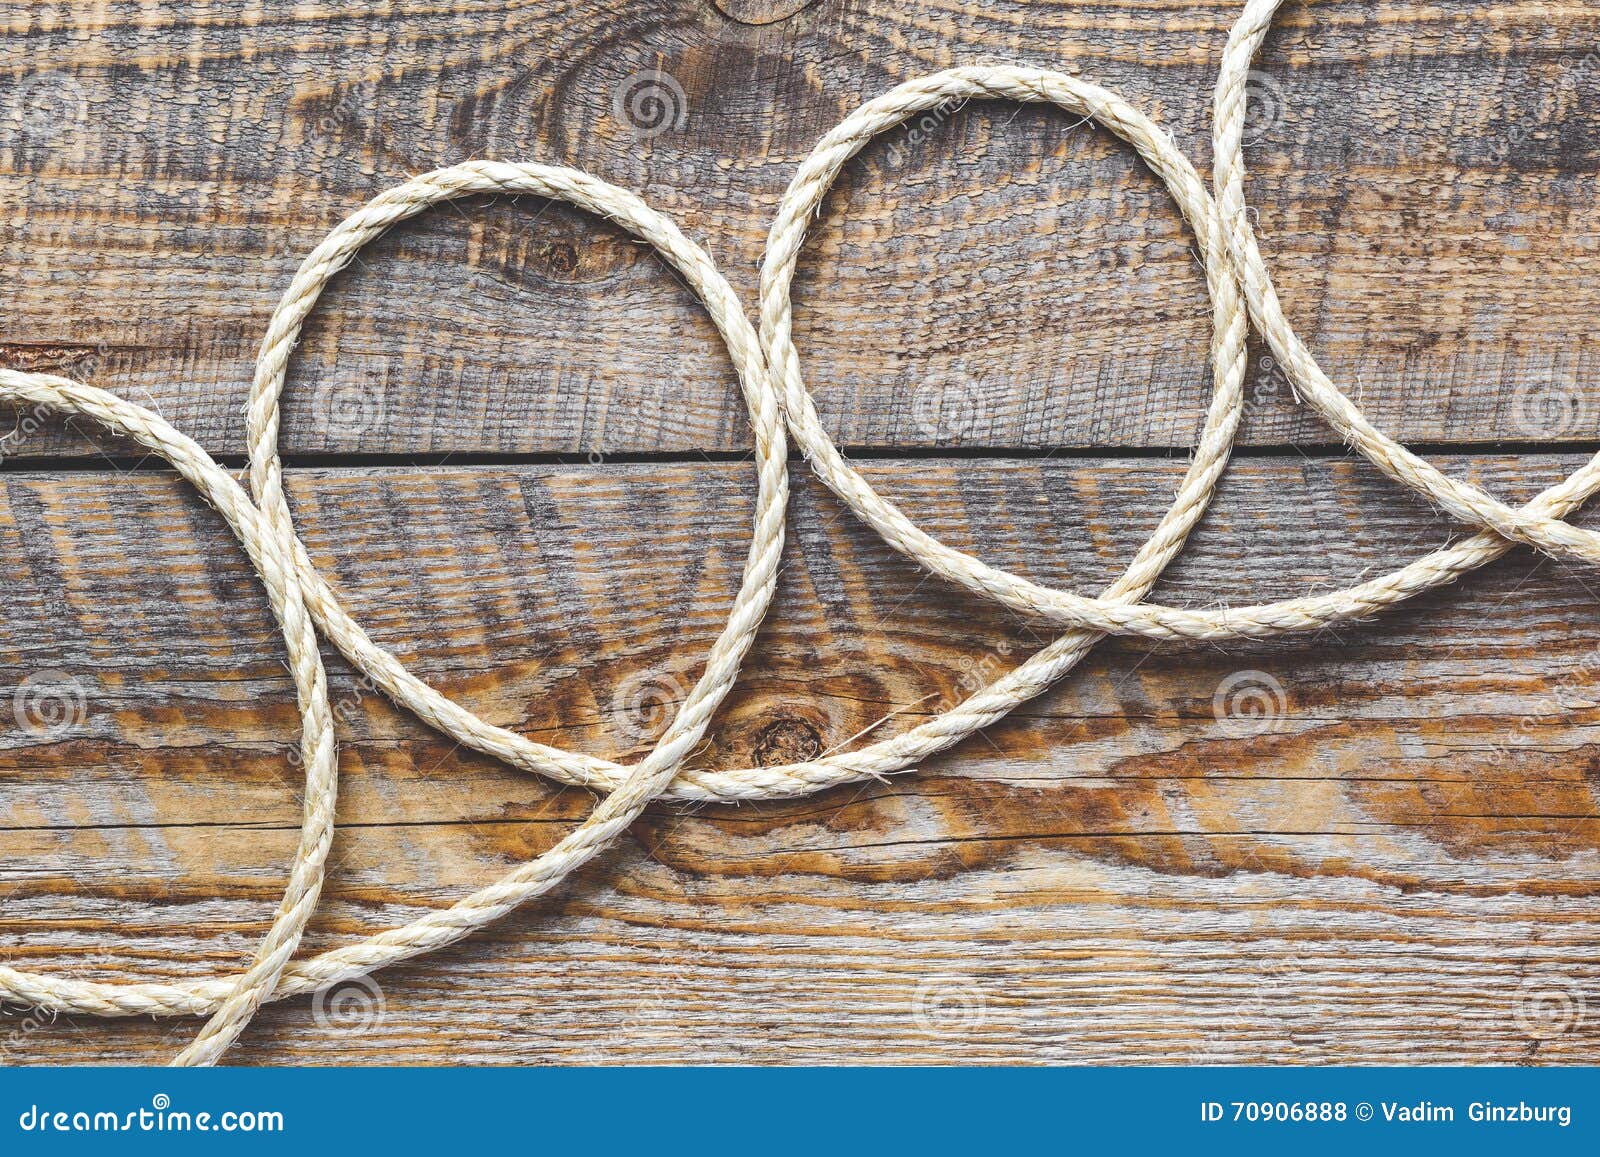 Rope gyrate on a wooden table close up